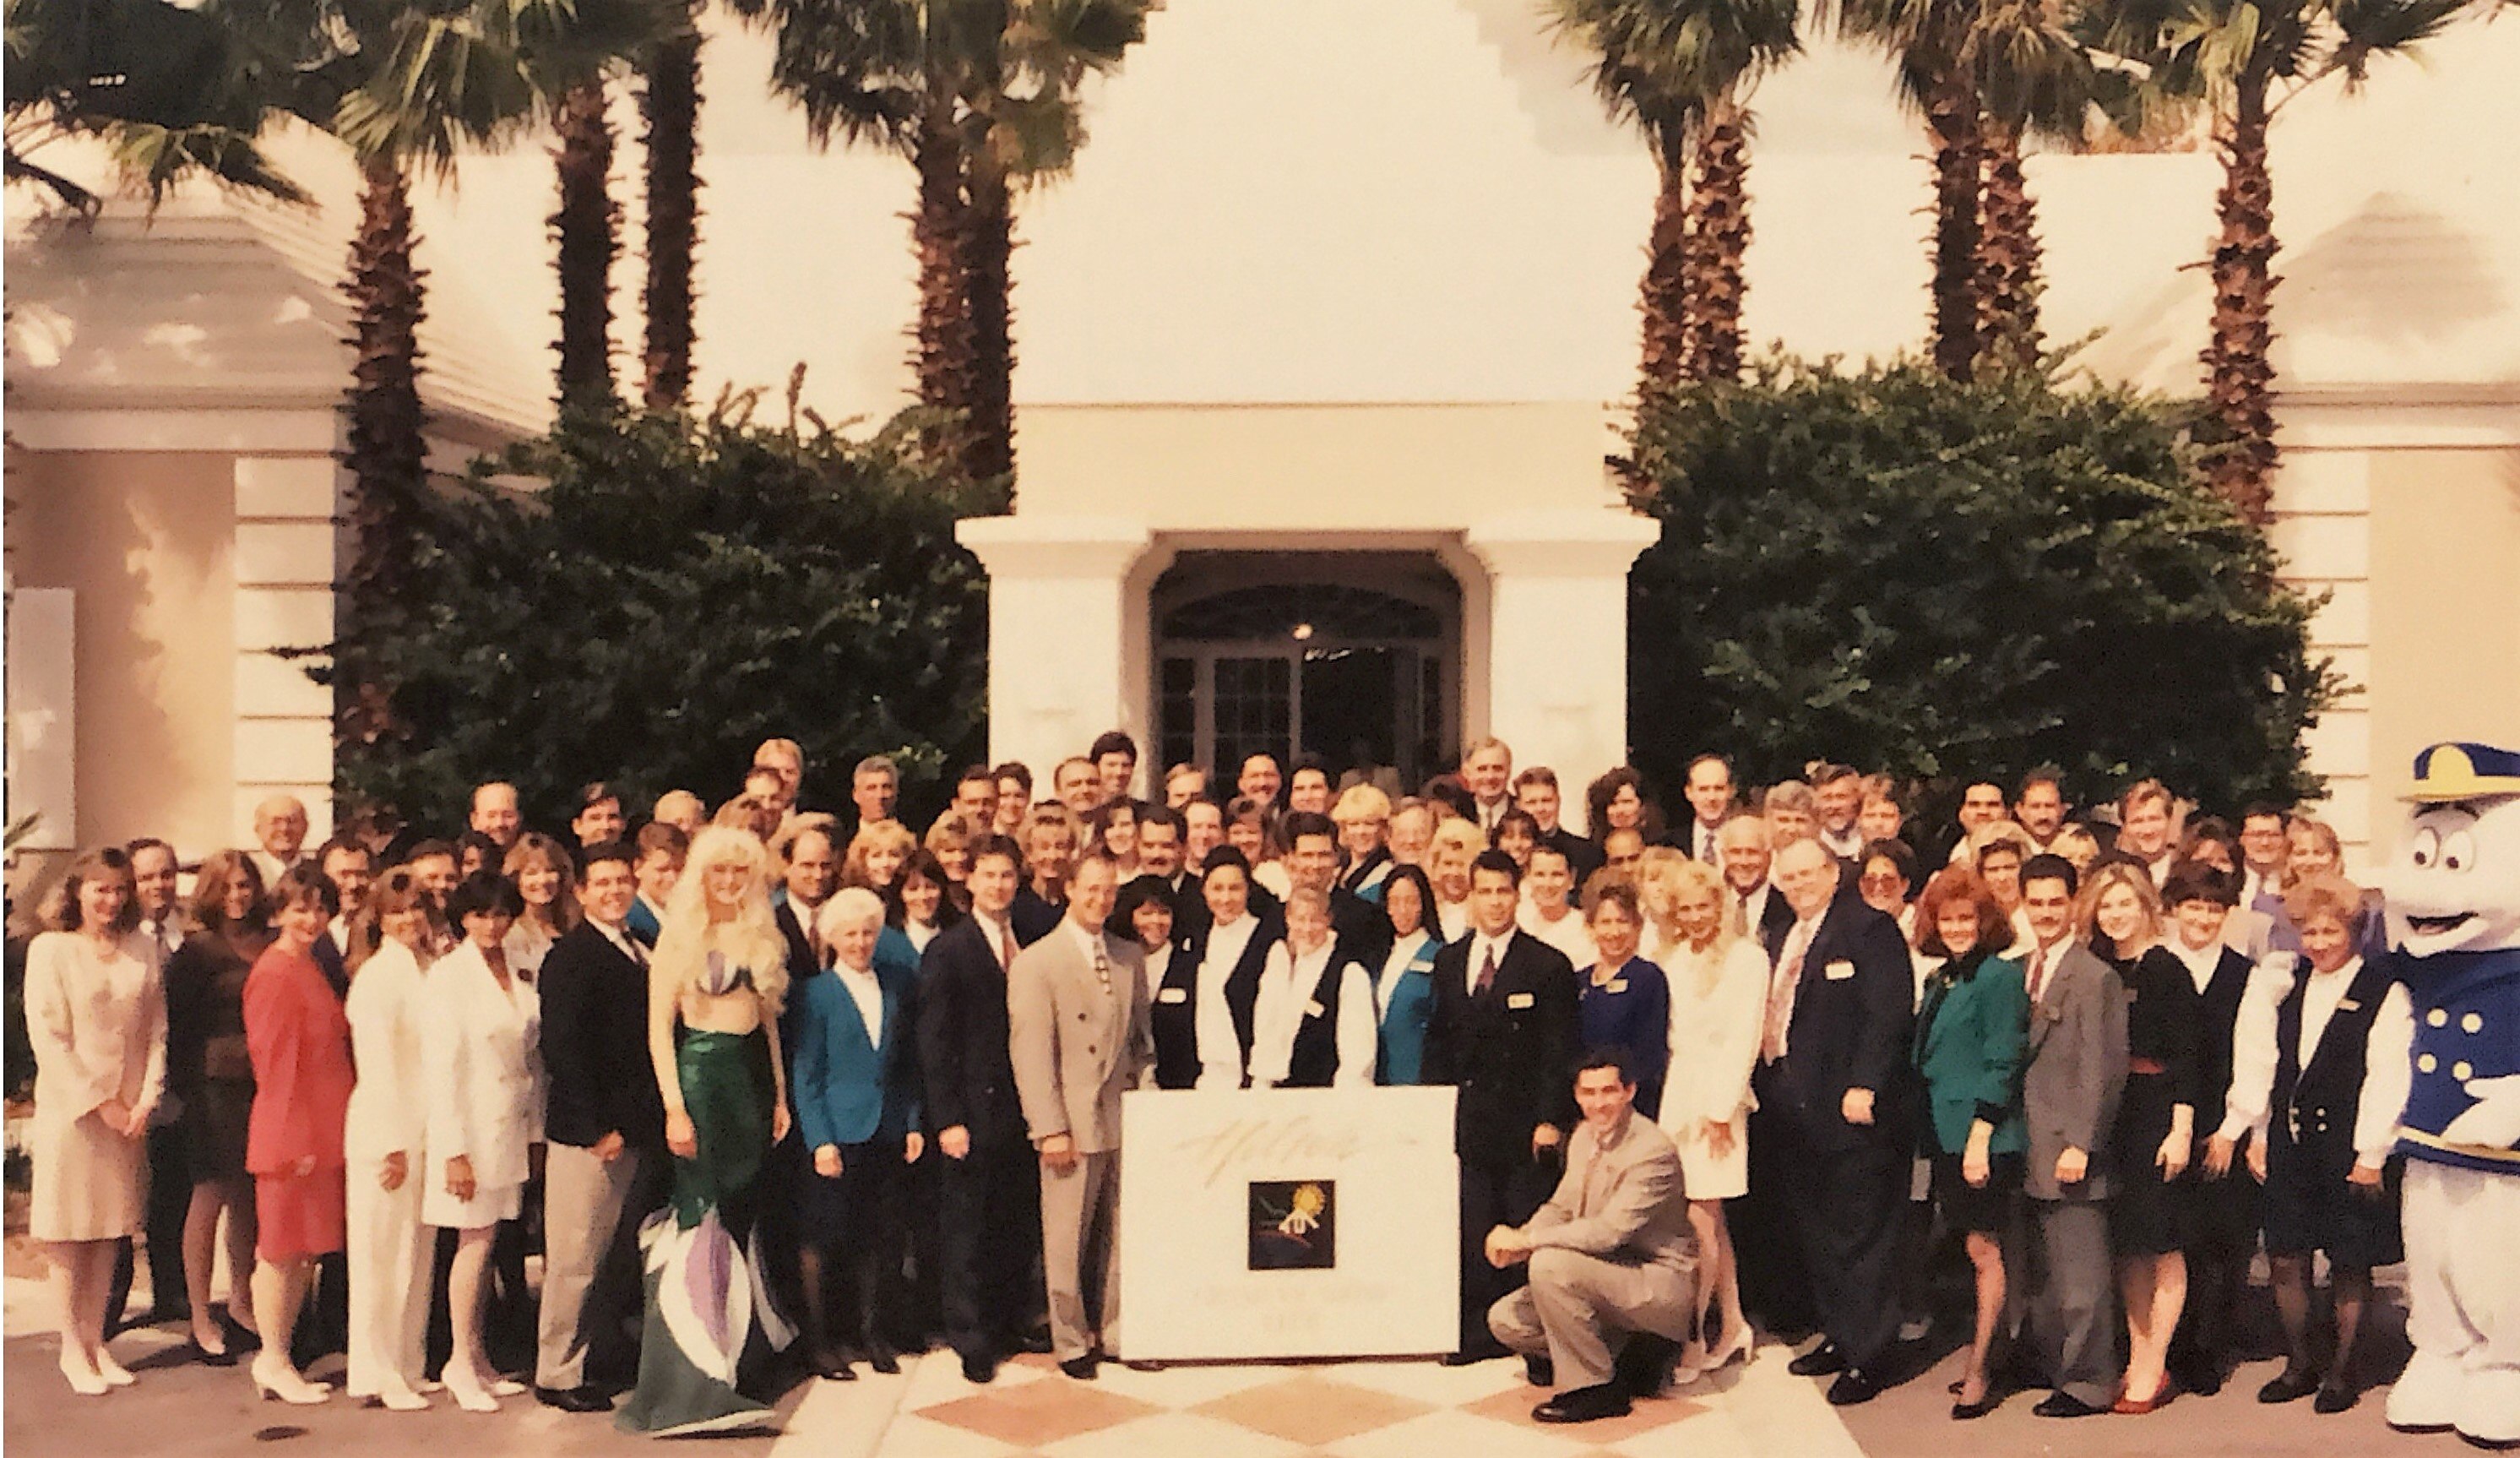 Hilton Grand Vacations at SeaWorld team on opening day in 1995 in Orlando, Florida. 